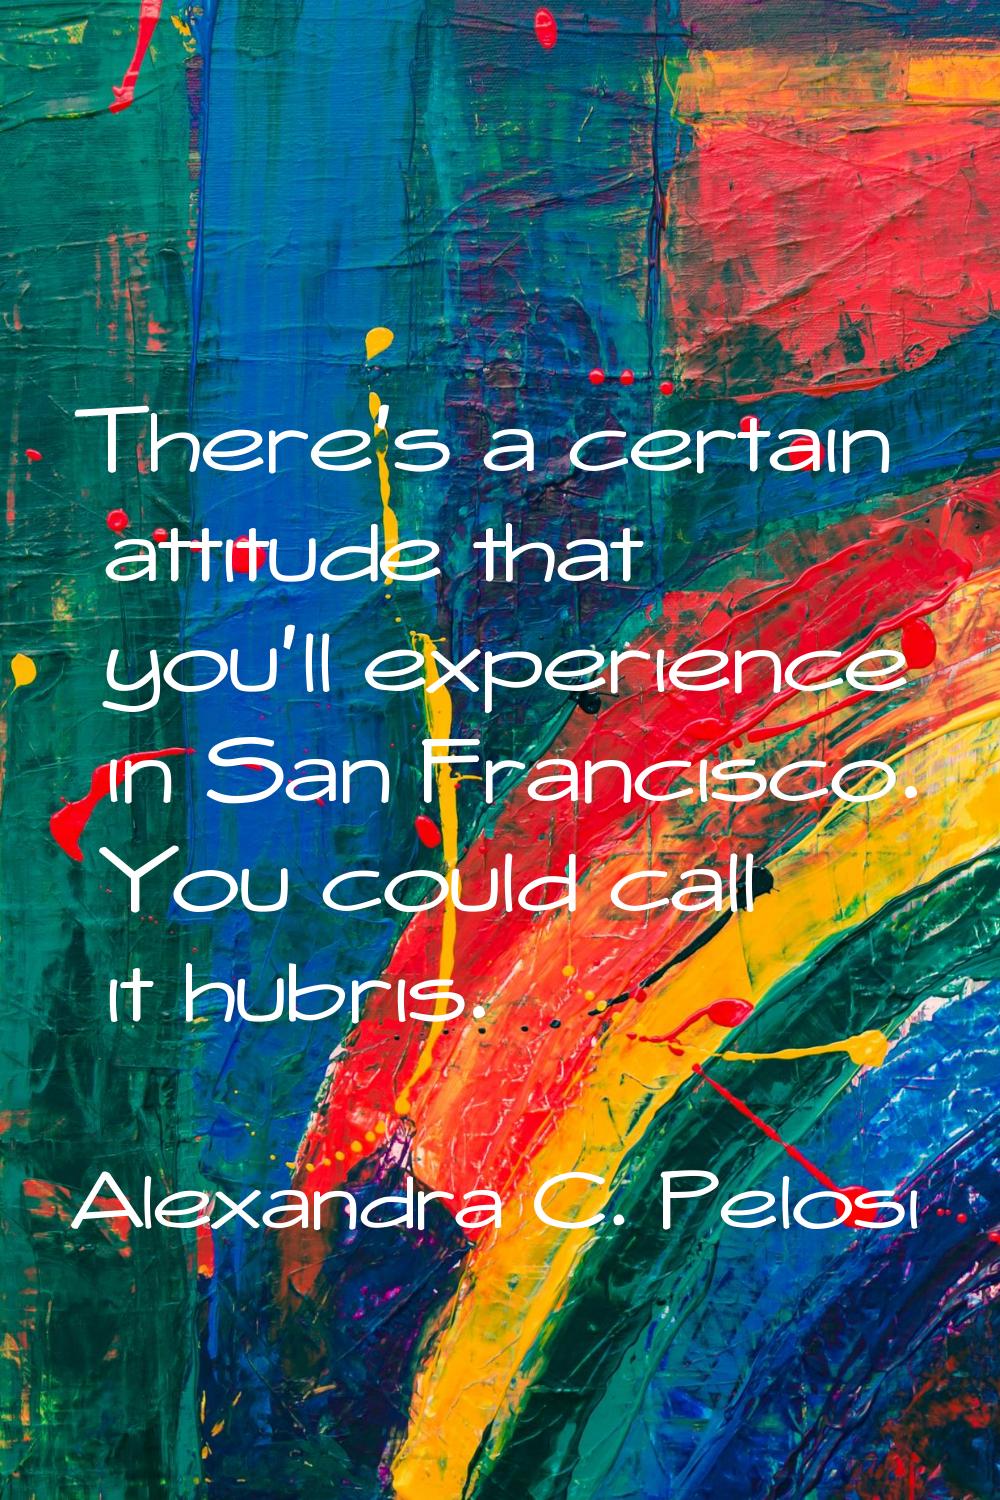 There's a certain attitude that you'll experience in San Francisco. You could call it hubris.